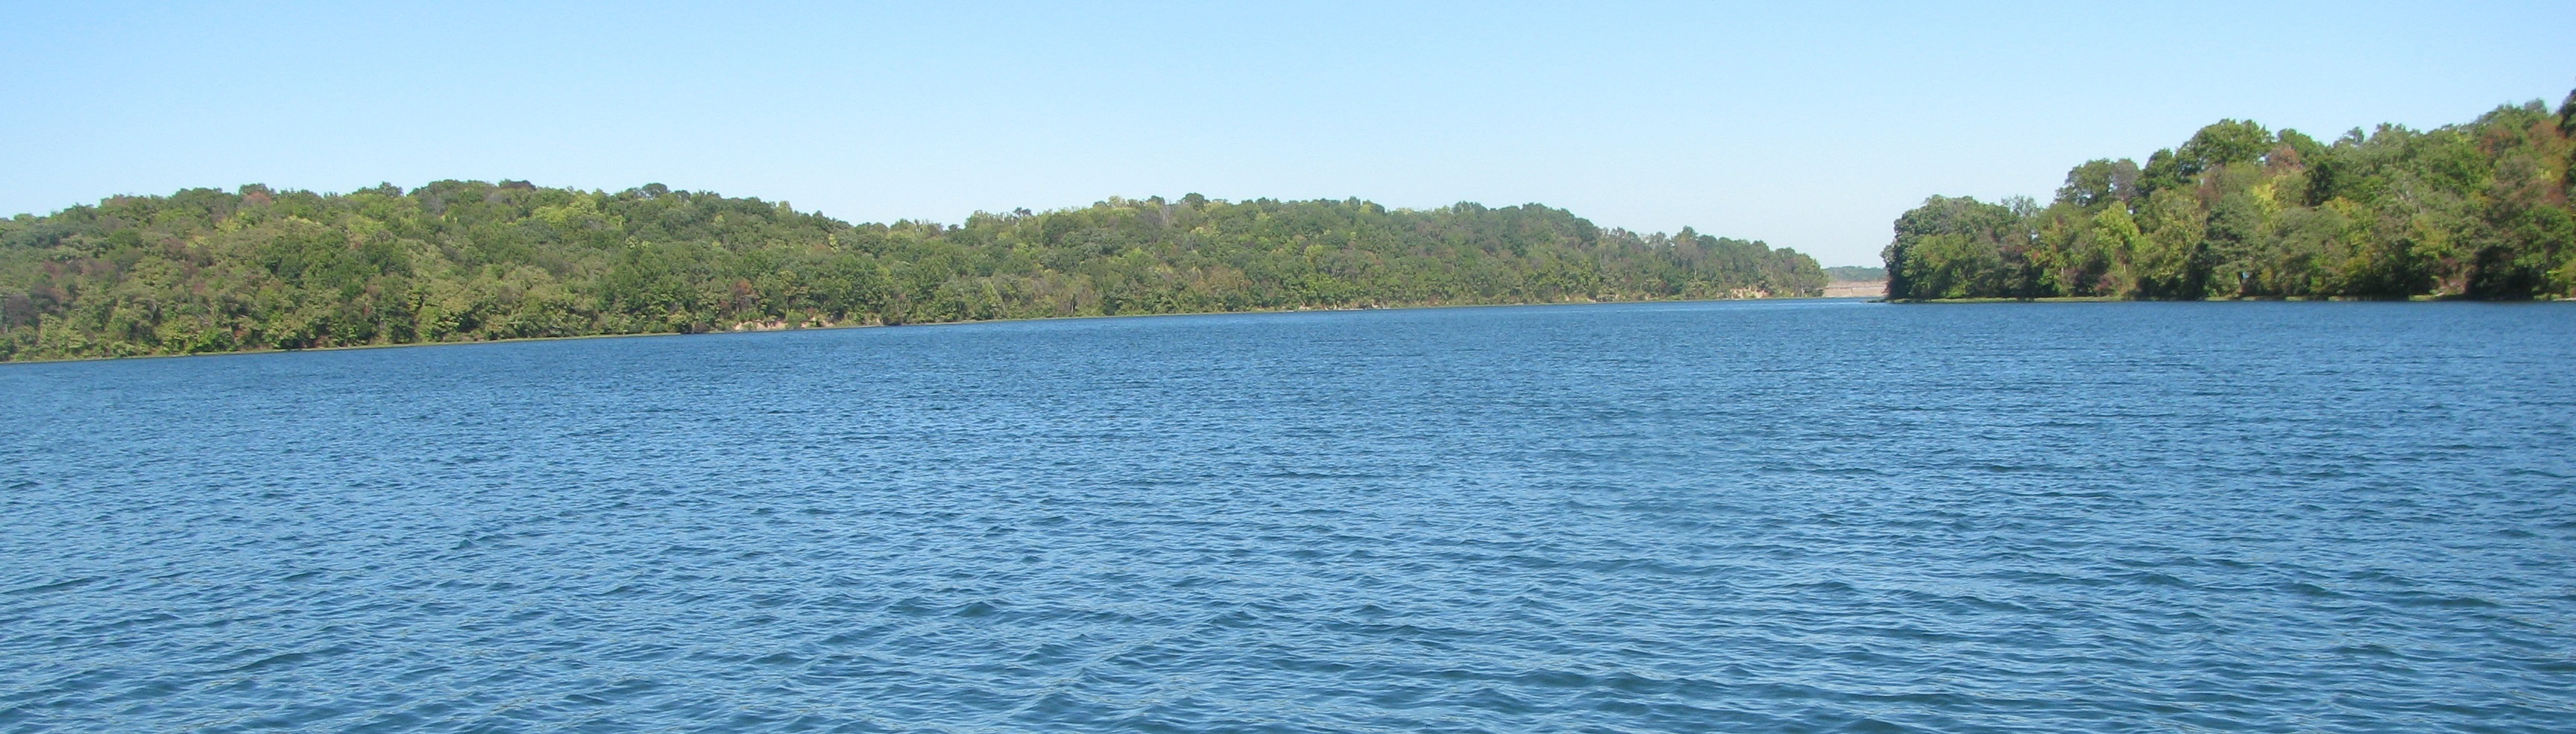 A view of Wyandotte County Lake on a beautiful and warm summer day